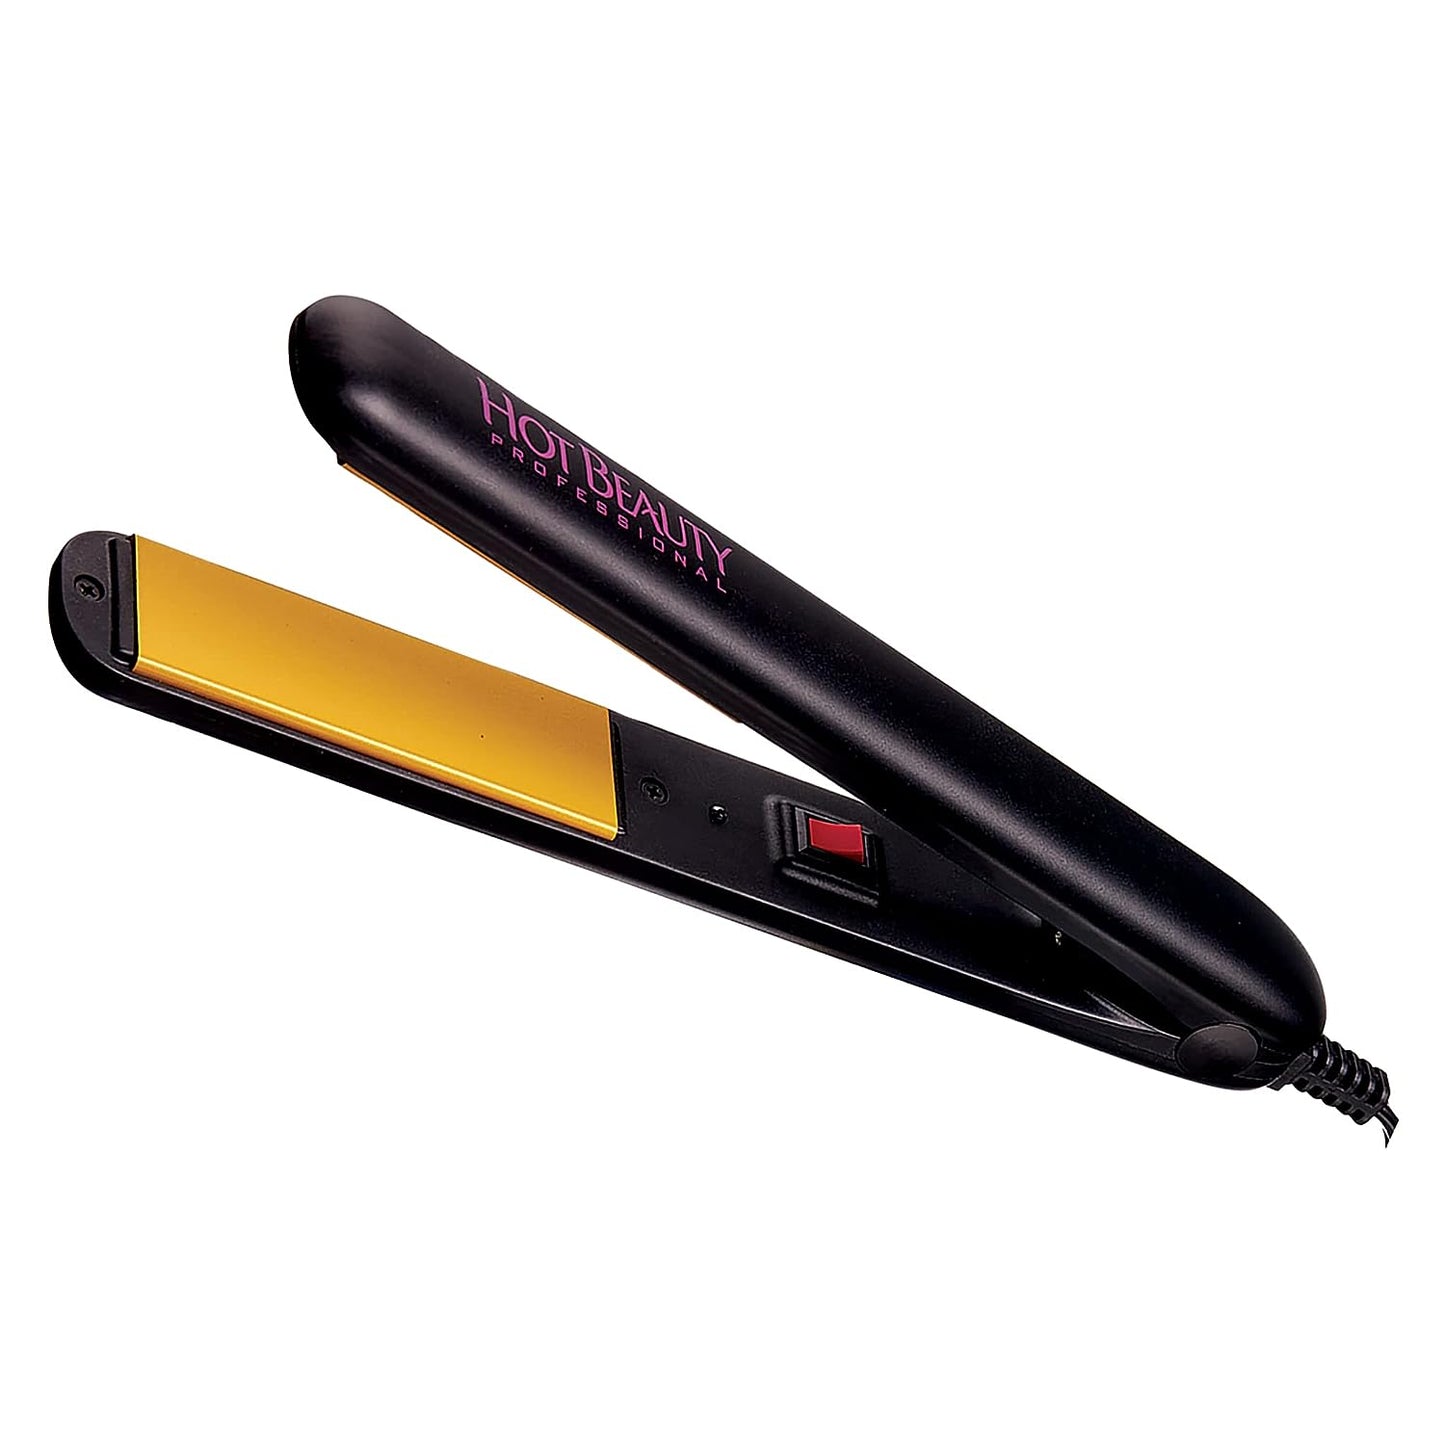 Hot Beauty Professional Hair Straightener Combo 2-in-1 Value Pack